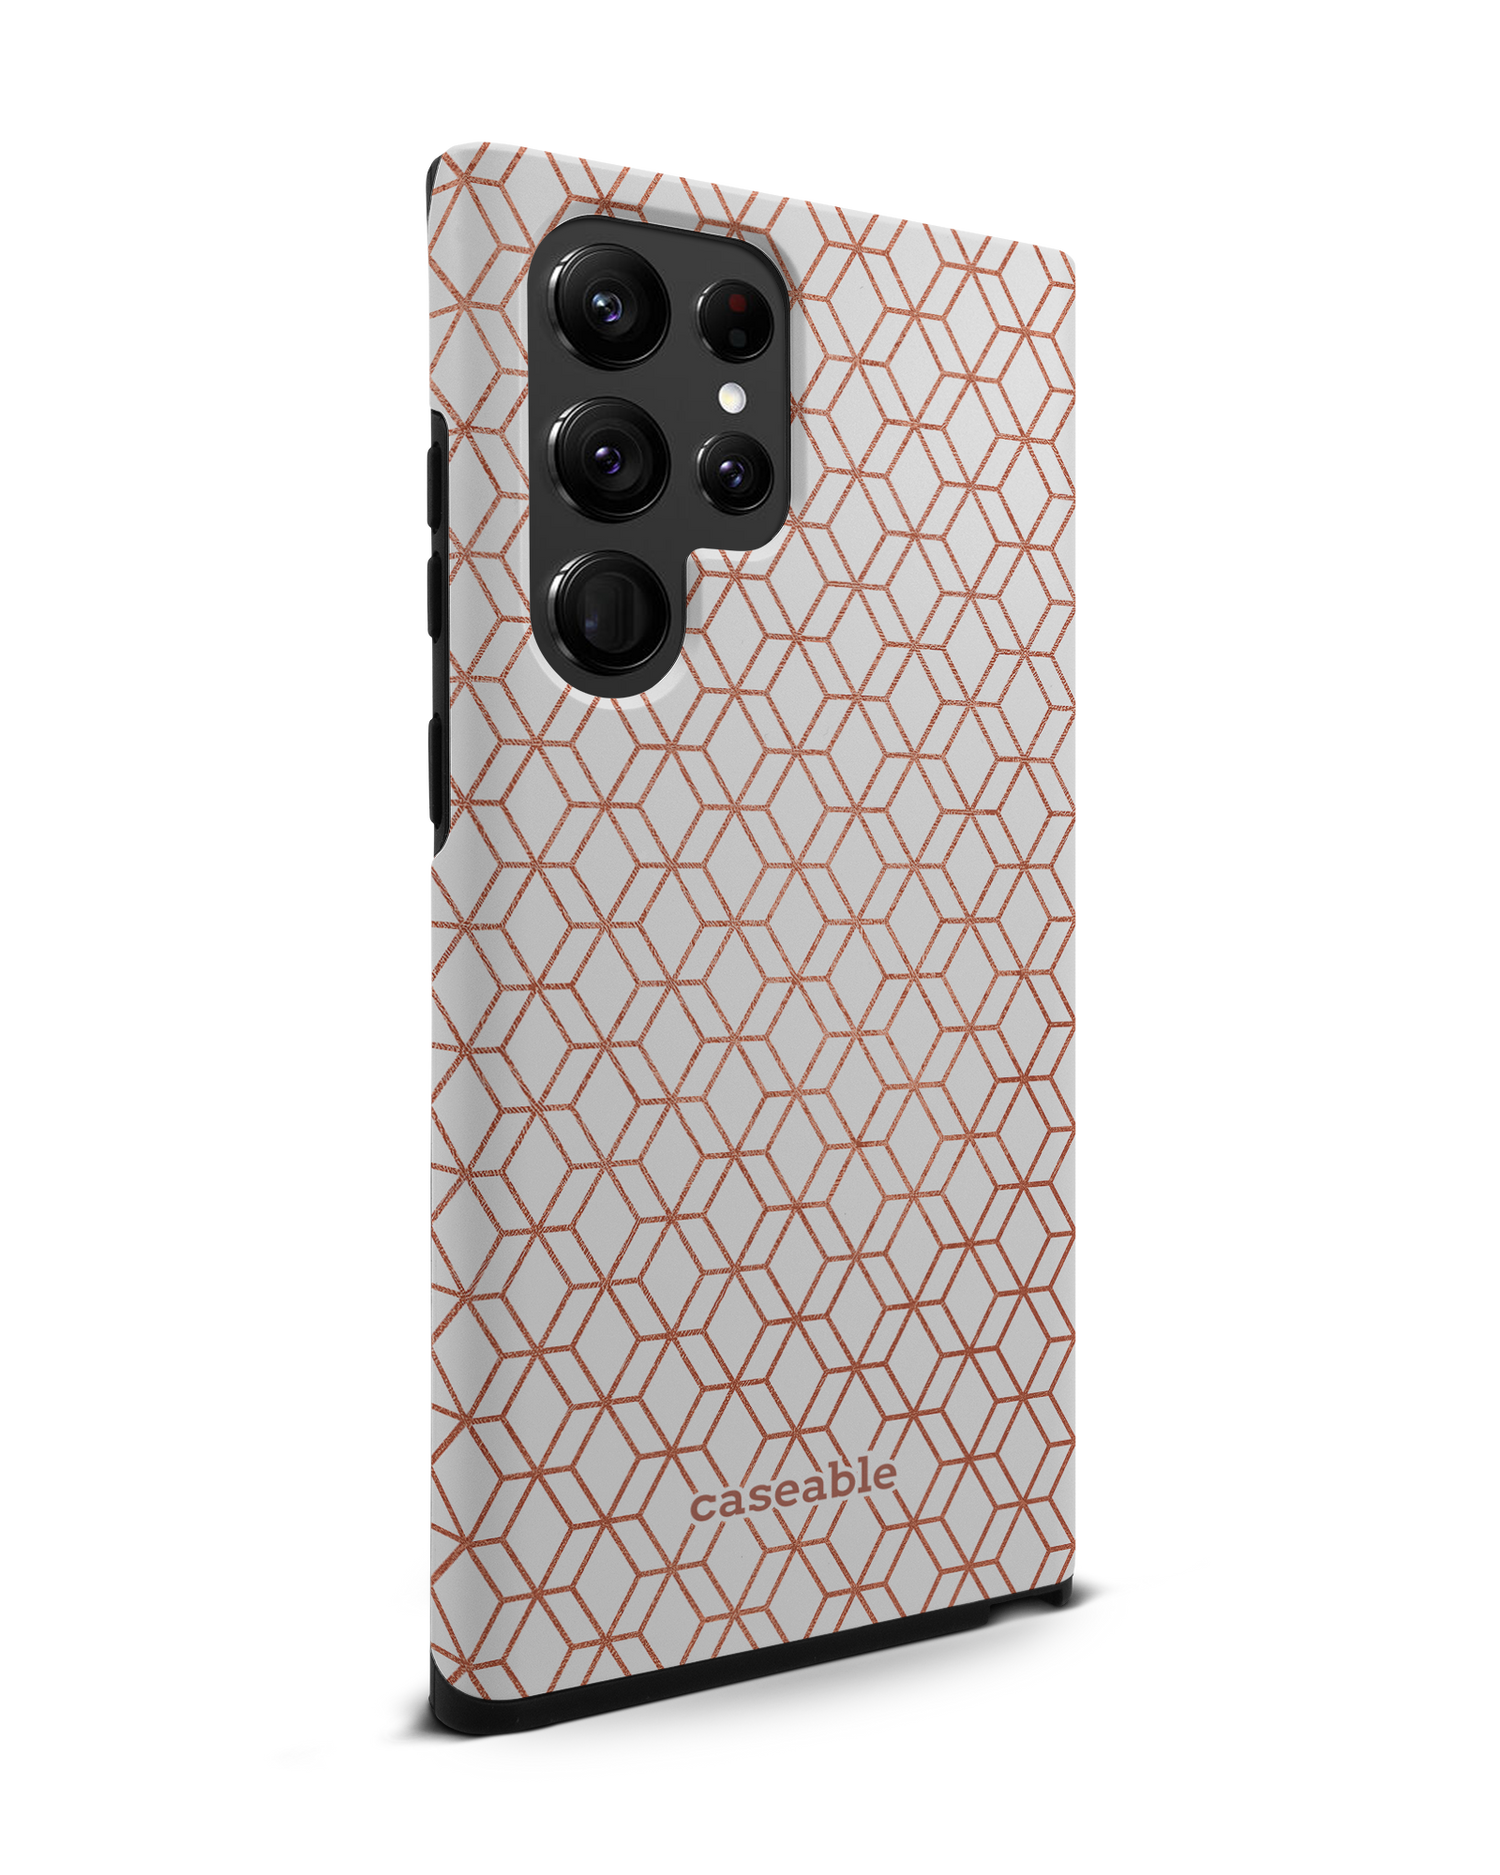 Morning Pattern Premium Phone Case Samsung Galaxy S22 Ultra 5G: View from the left side